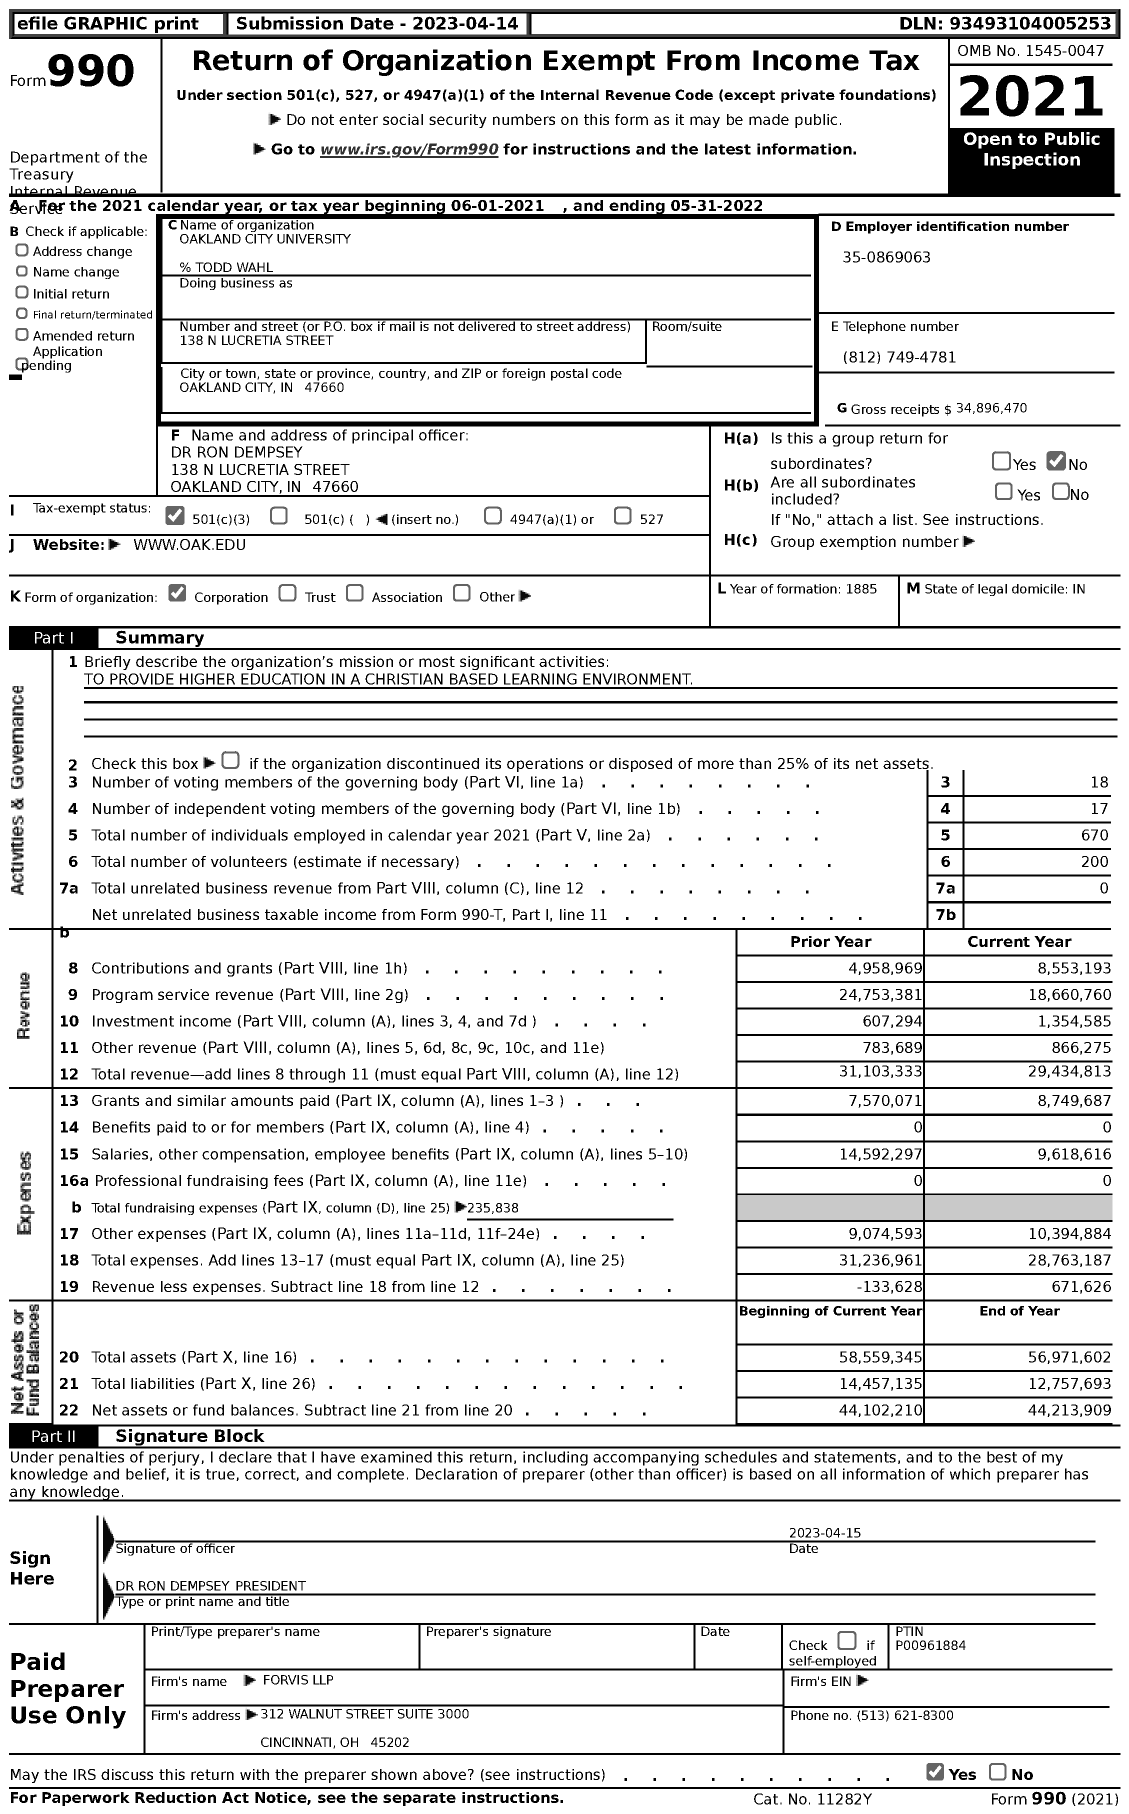 Image of first page of 2021 Form 990 for Oakland City University (OCU)